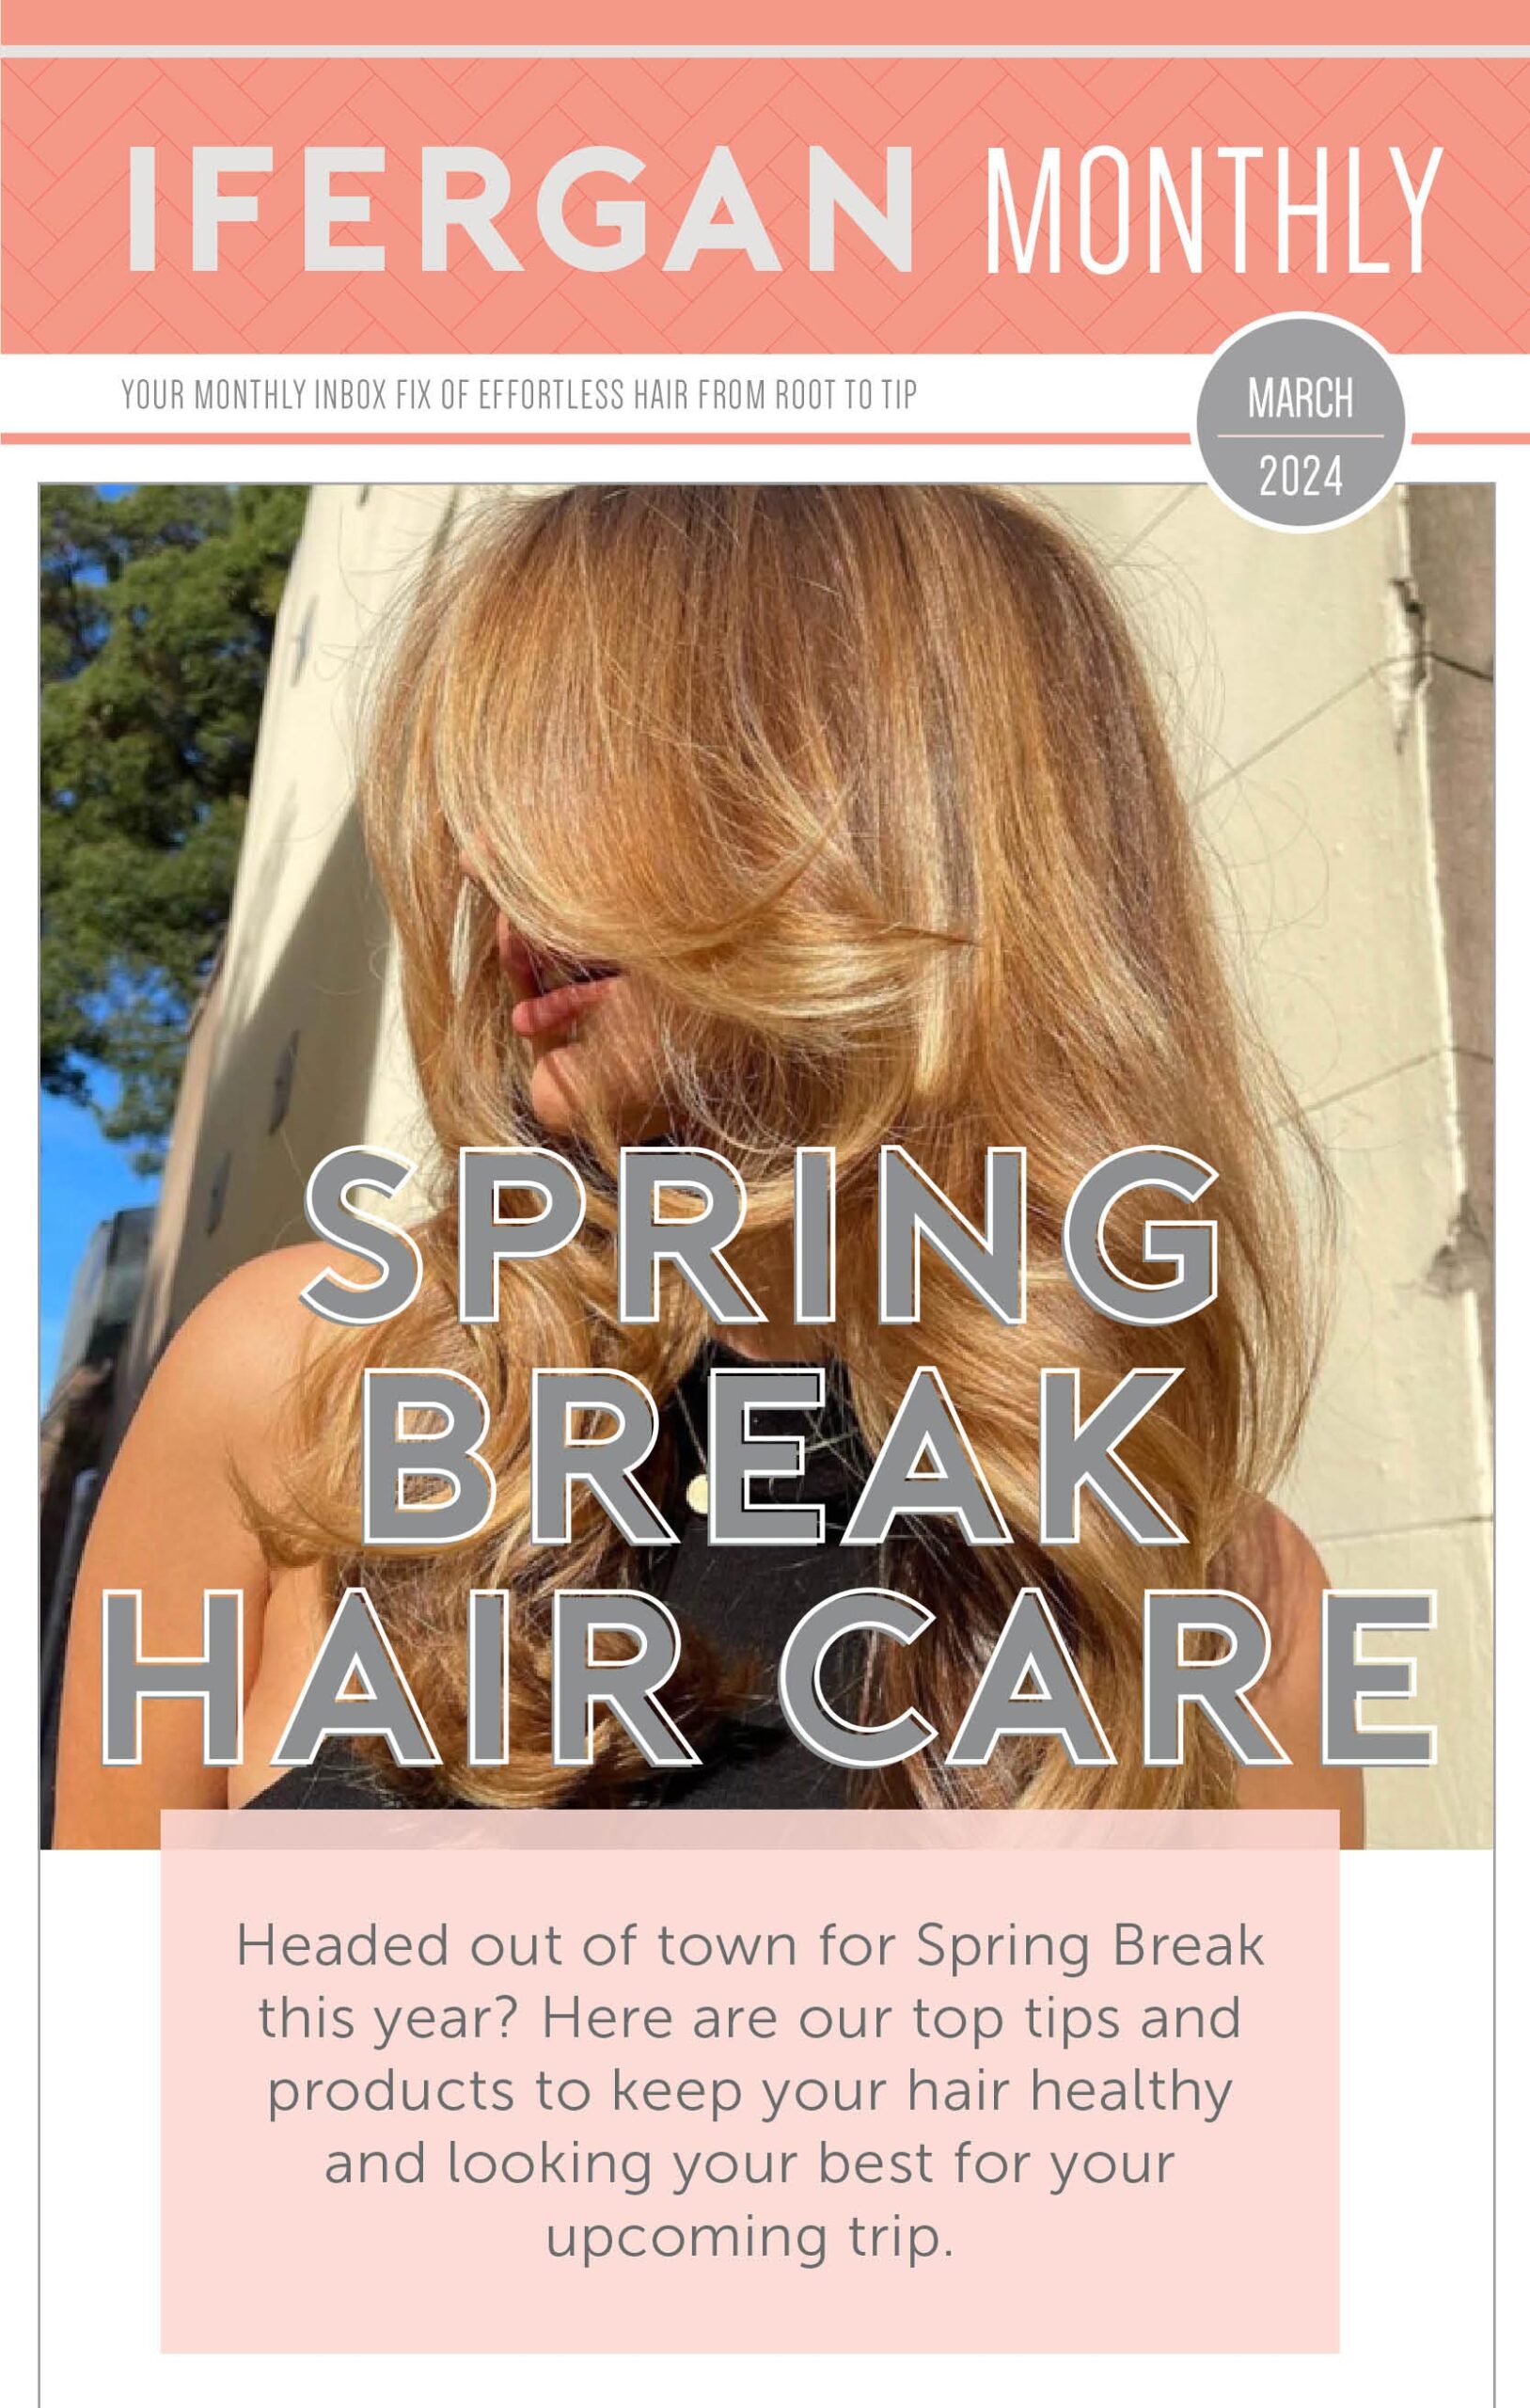 Ifergan Monthly - March 2024. Spring Break Hair Care Headed out of town for Spring Break this year? Here are our top tips and products to keep your hair healthy and looking your best for your upcoming trip.